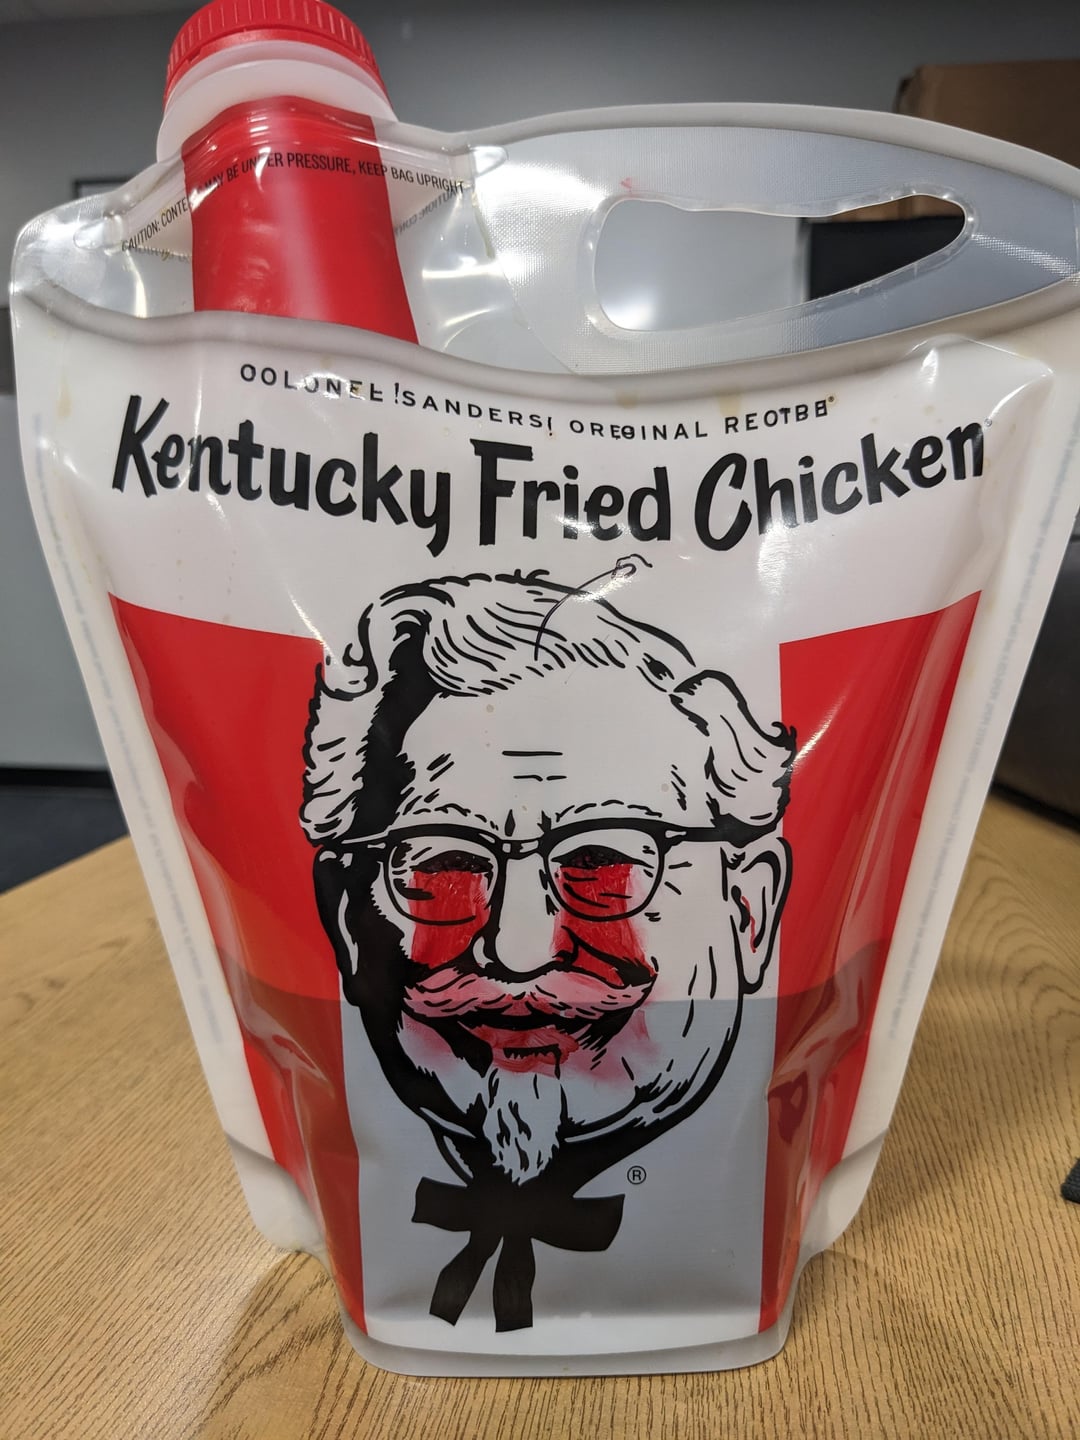 KFC has a half gallon soda bucket - Dining and Cooking